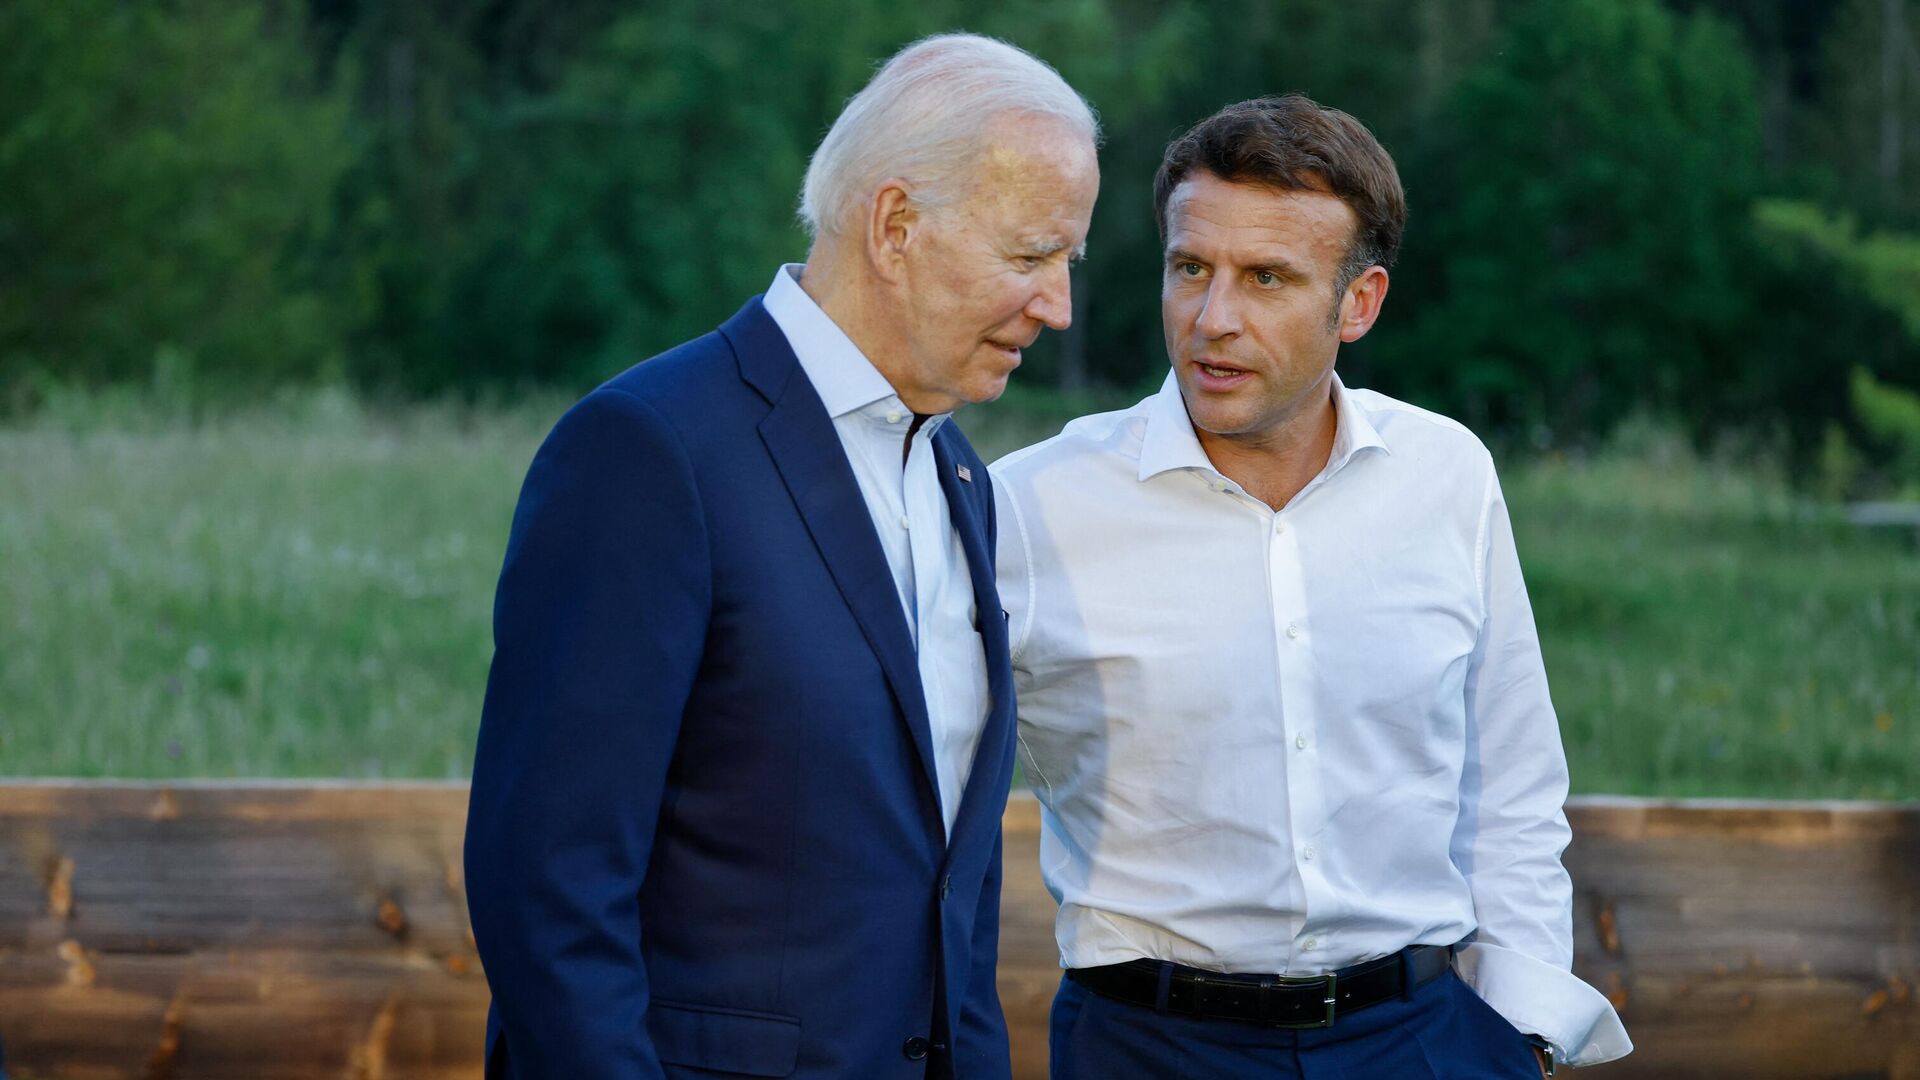 US President Joe Biden and French President Emmanuel Macron speak after posing for an informal group photo at a bench after a working dinner during the G7 Summit held at Elmau Castle, southern Germany on June 26, 2022. - Sputnik International, 1920, 01.12.2022